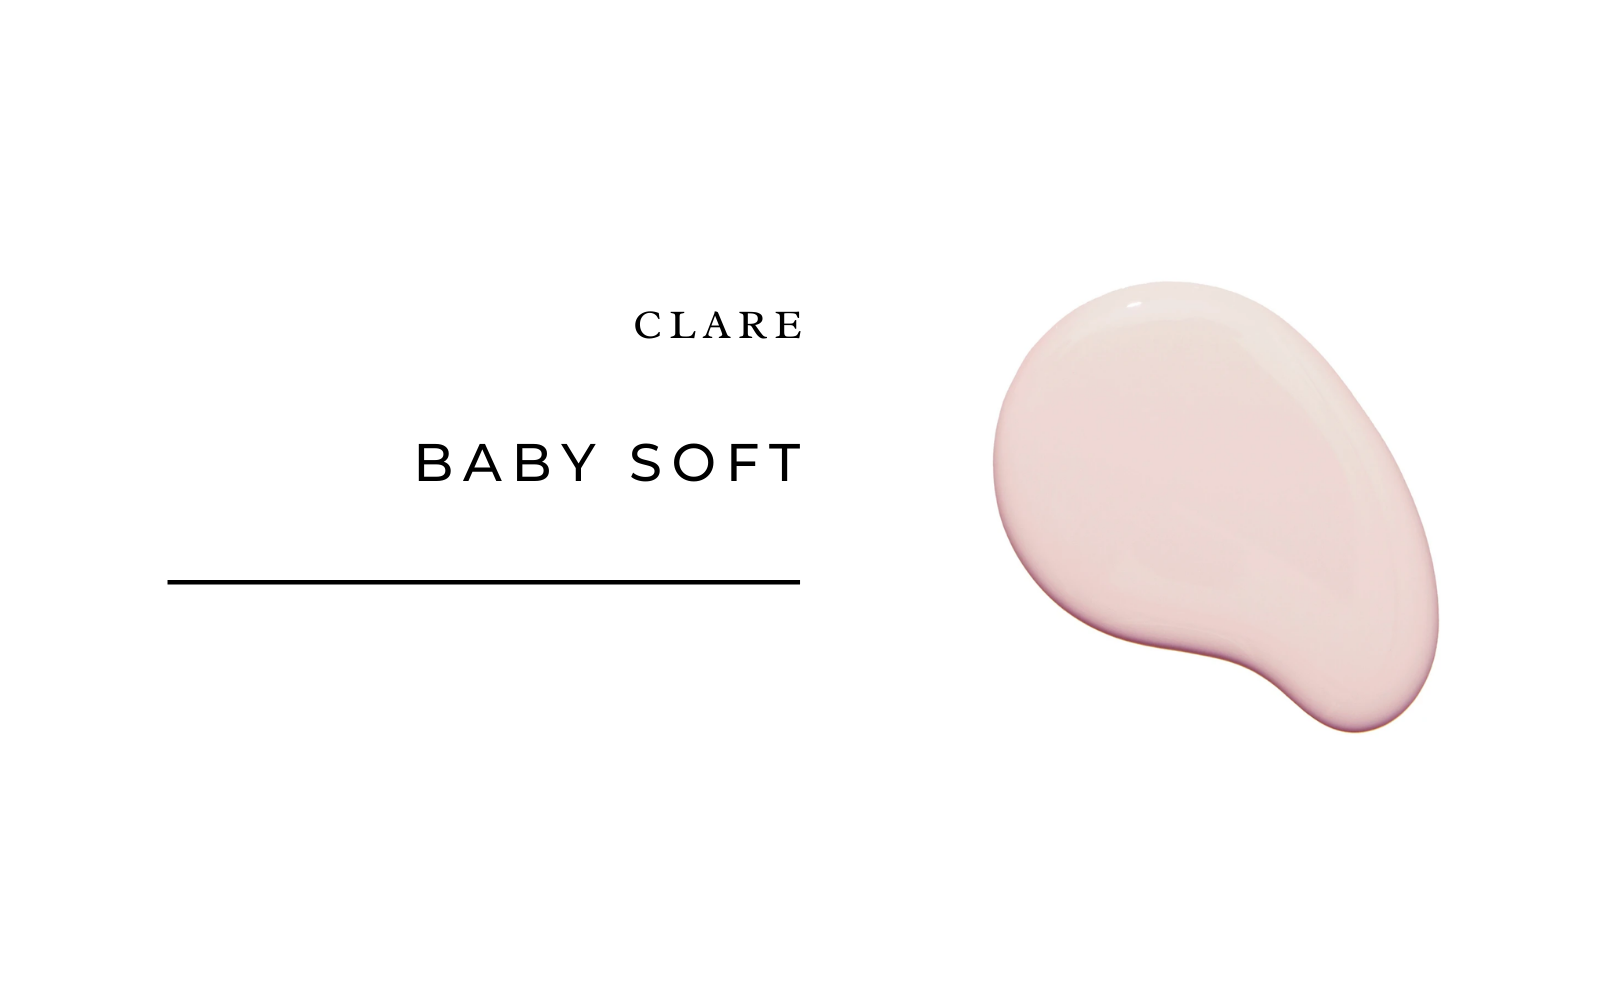 clare baby soft